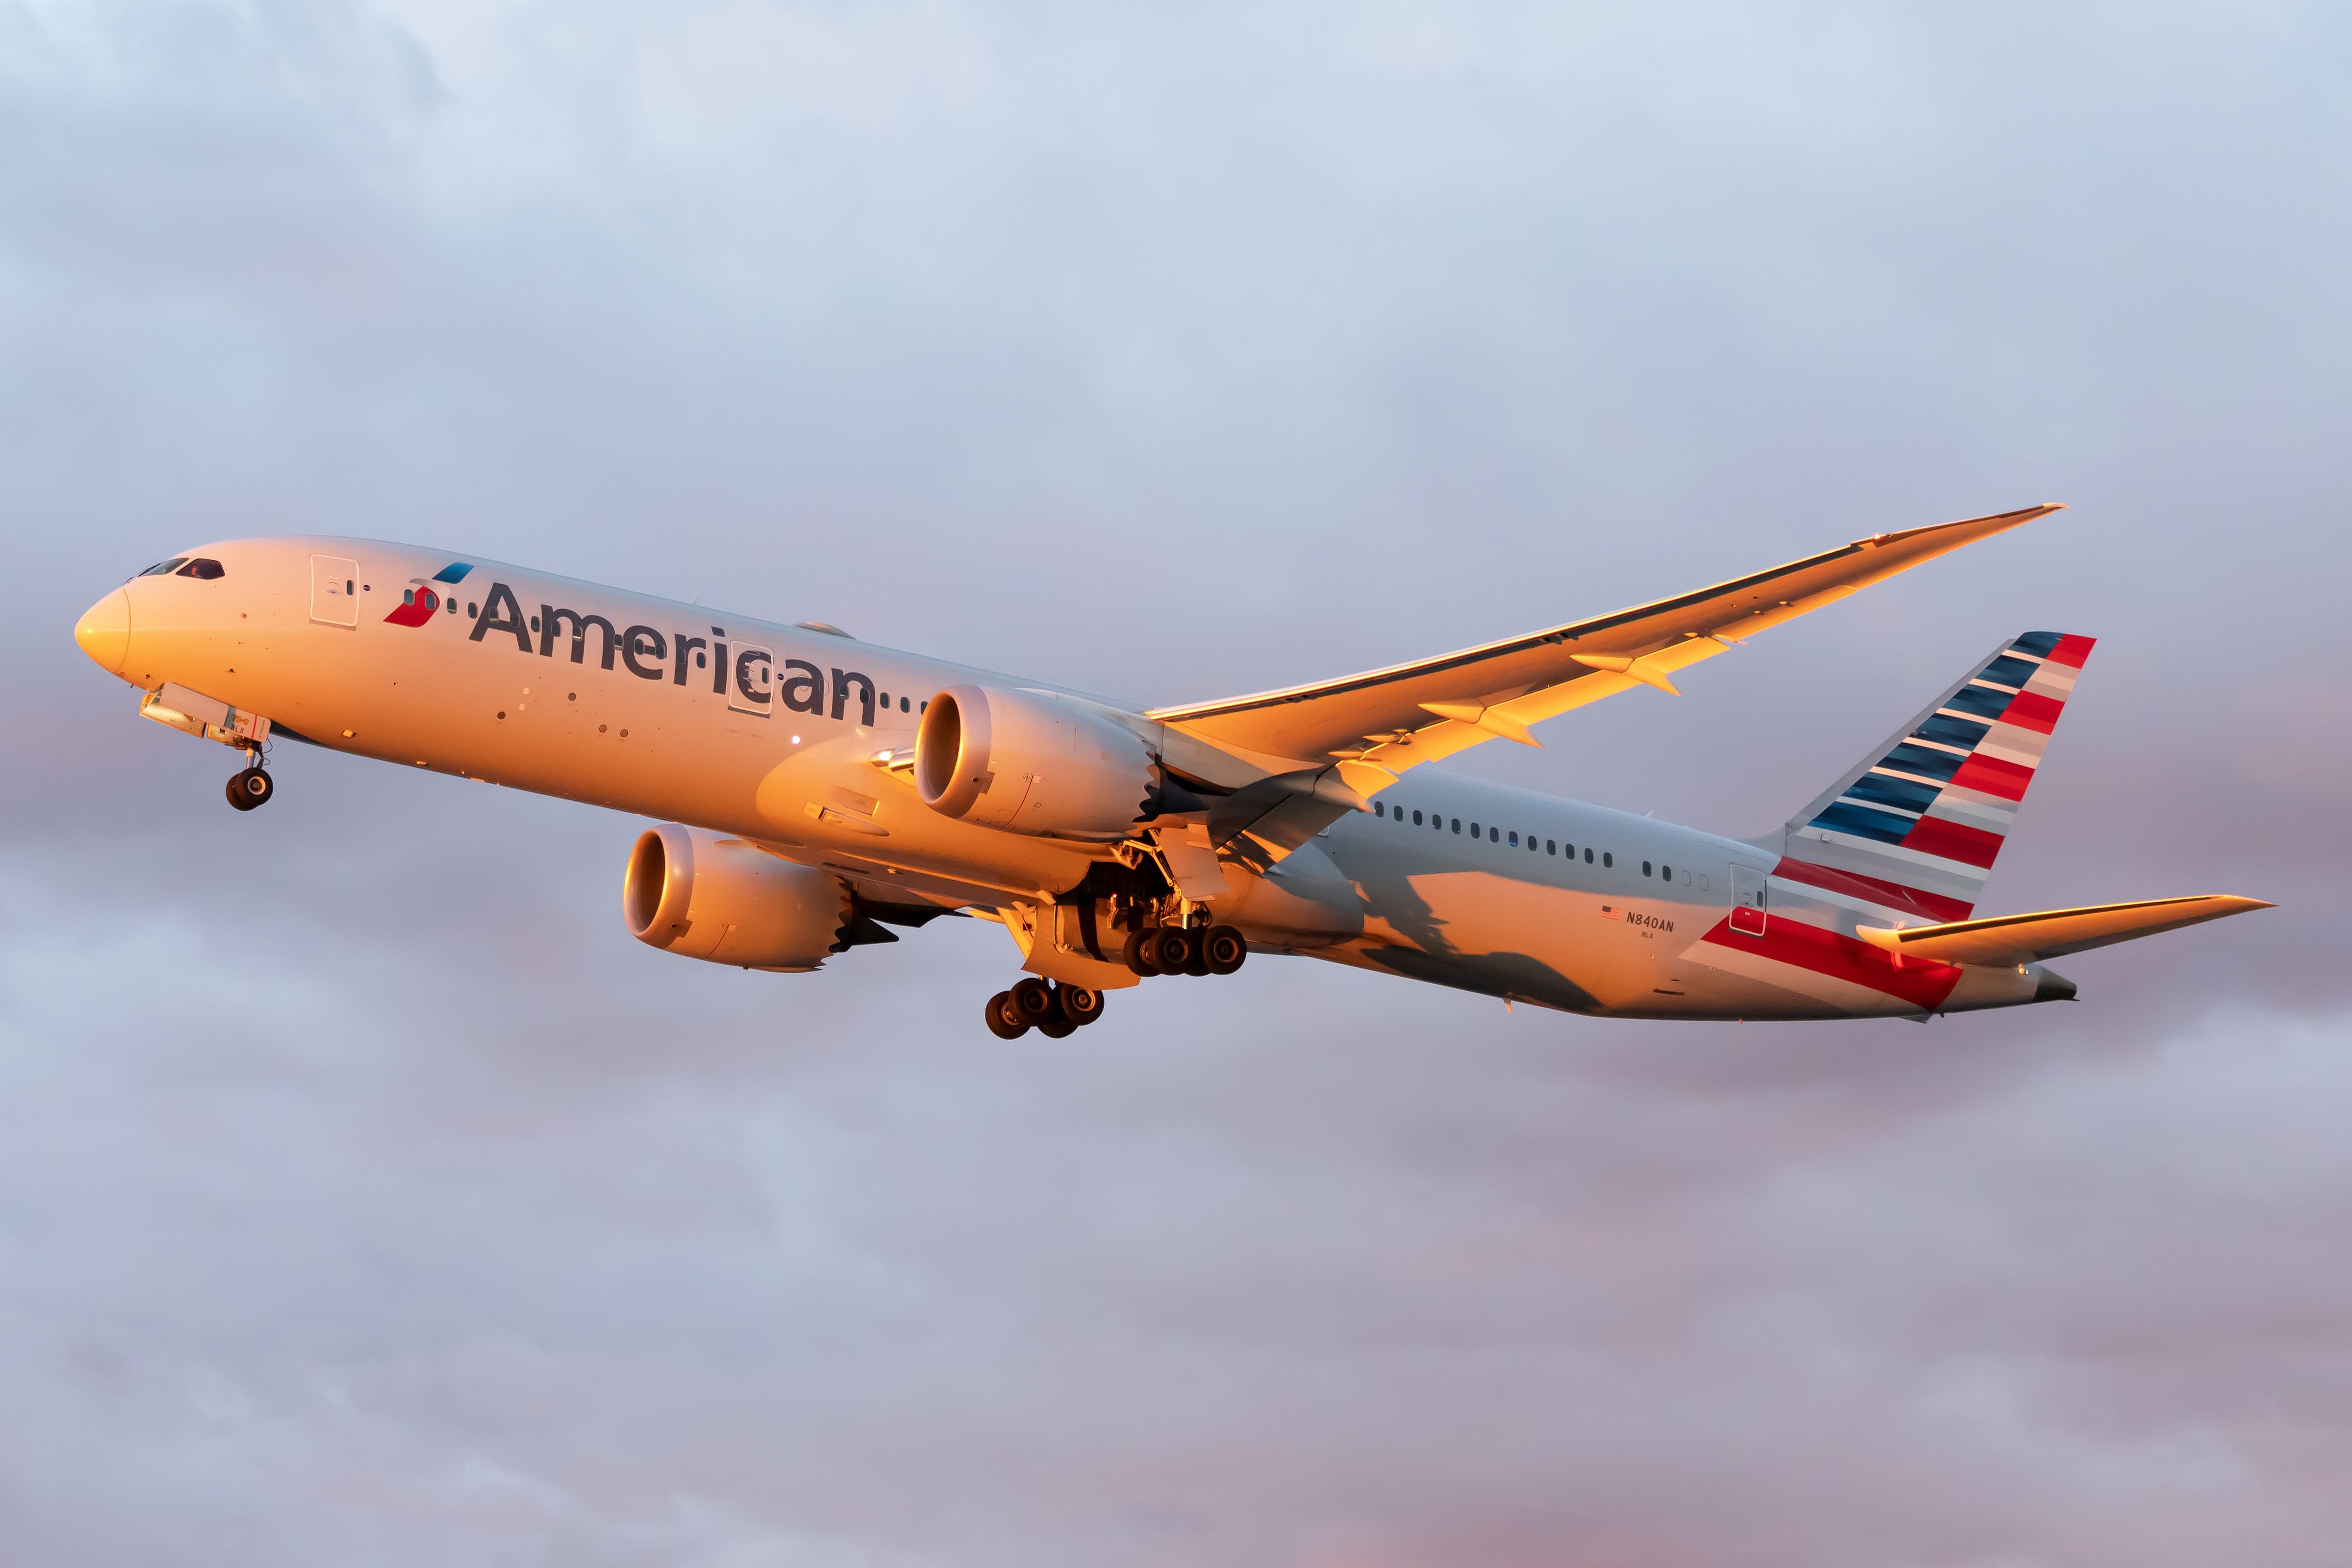 American Airlines Refreshes Flight Attendants on Article 5 of the